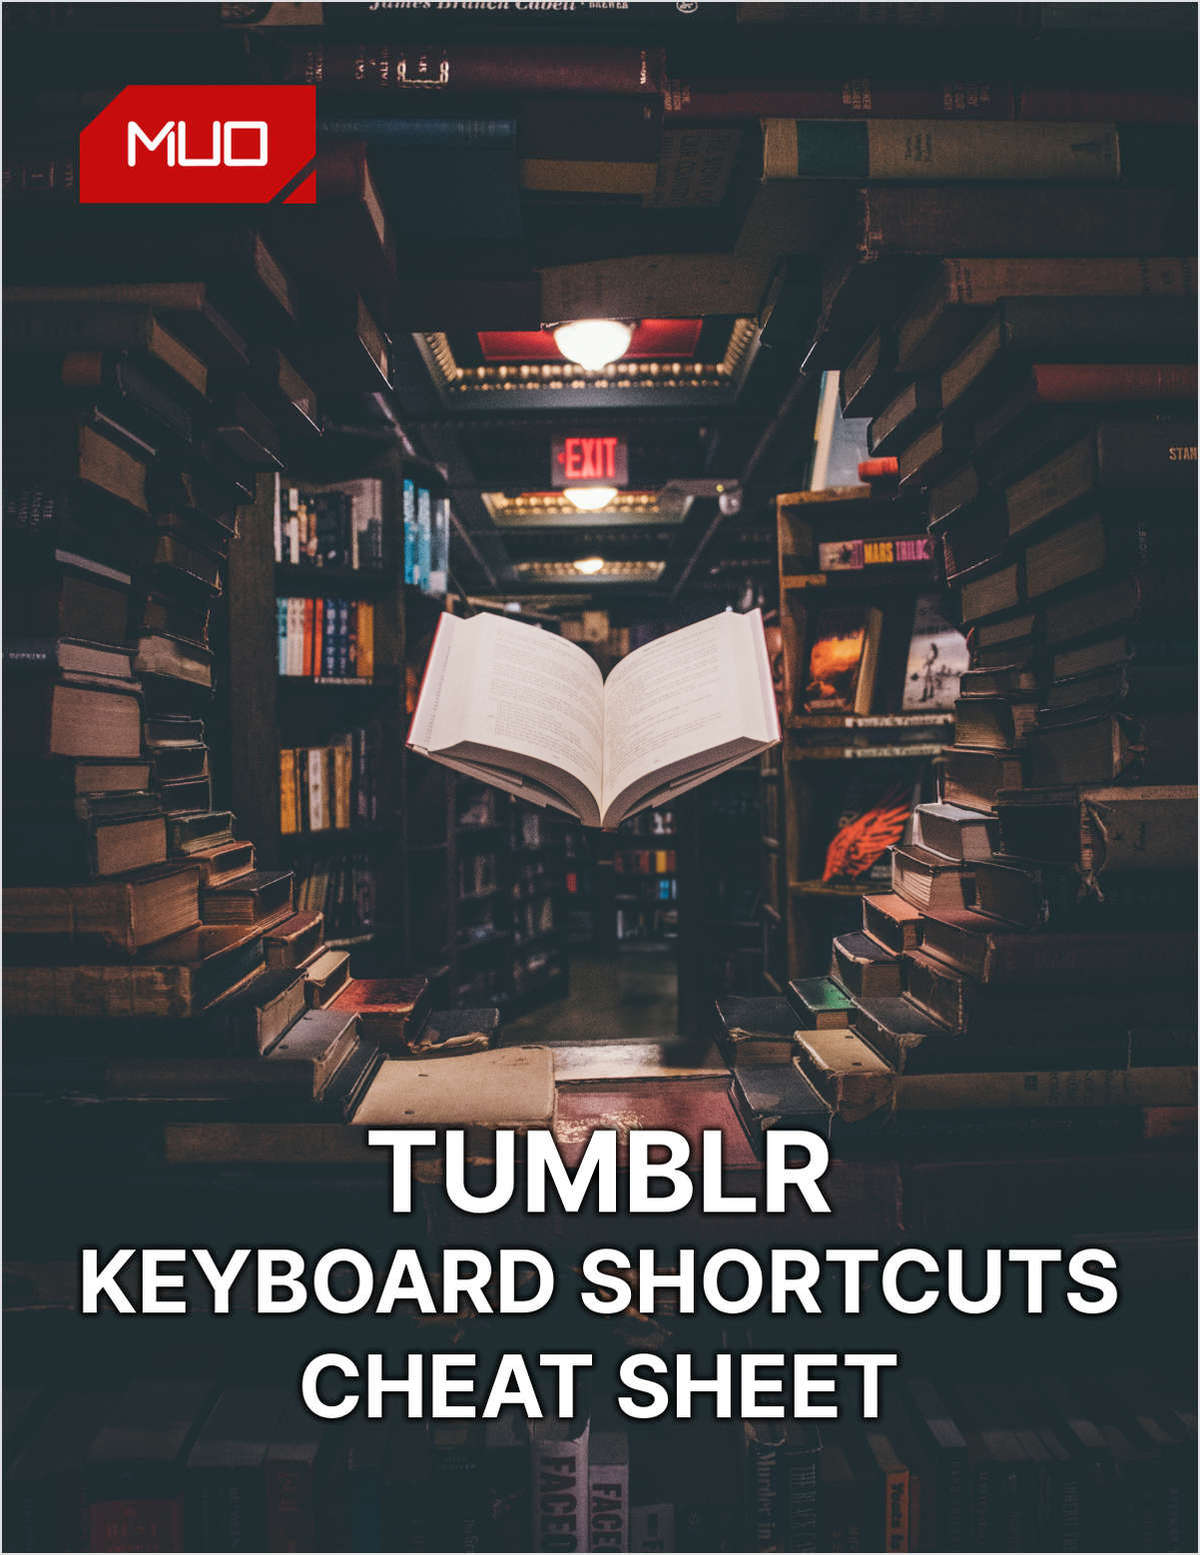 Use These Tumblr Keyboard Shortcuts to Blog Like a Pro